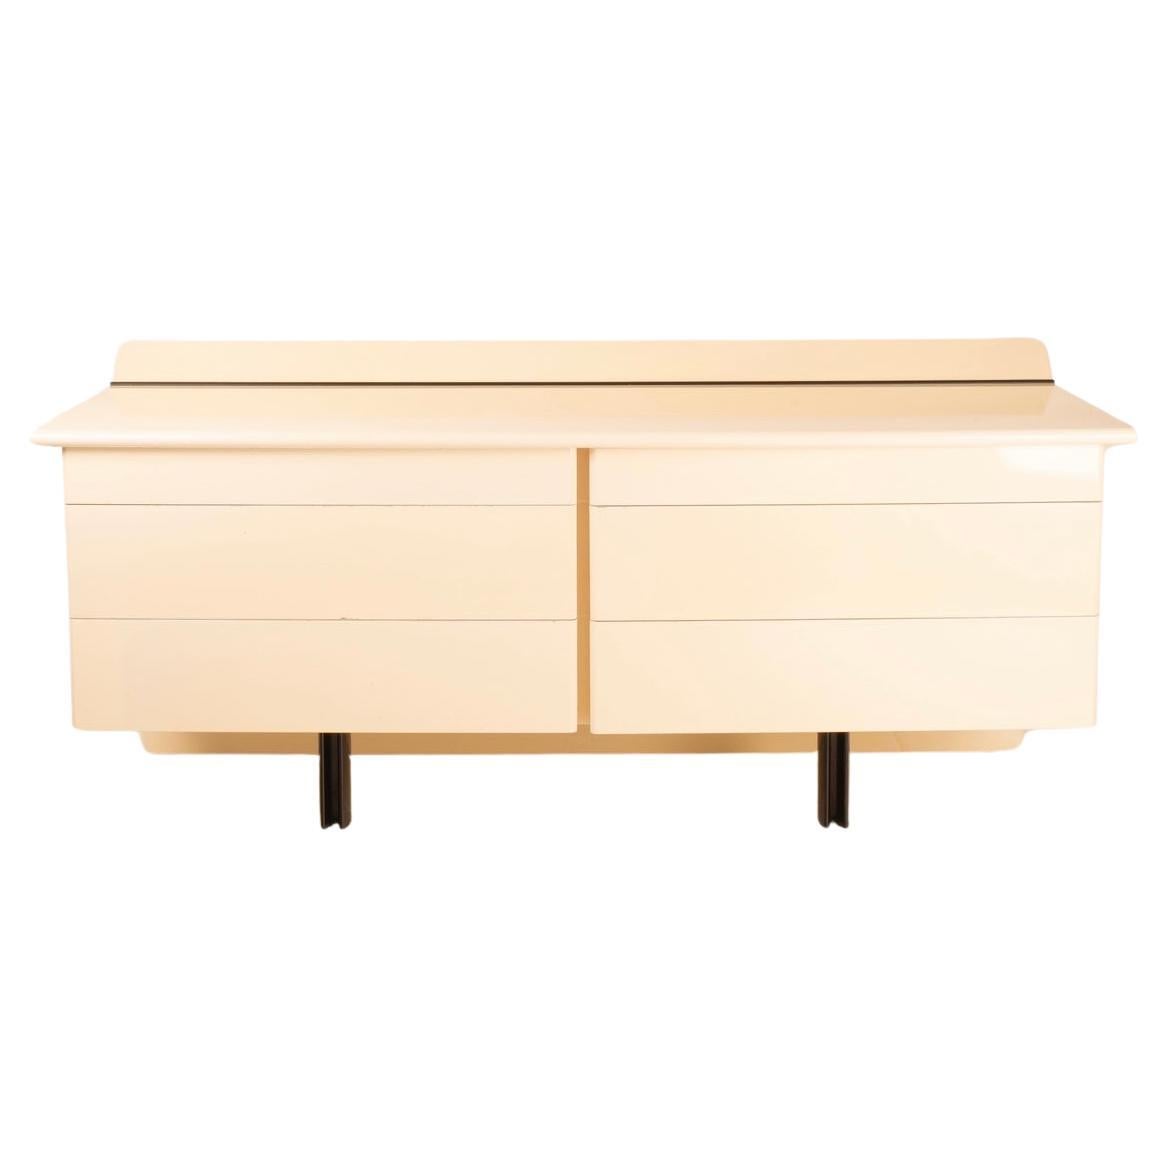 Alanda" chest of drawers by Paolo Piva for B&B Italia For Sale